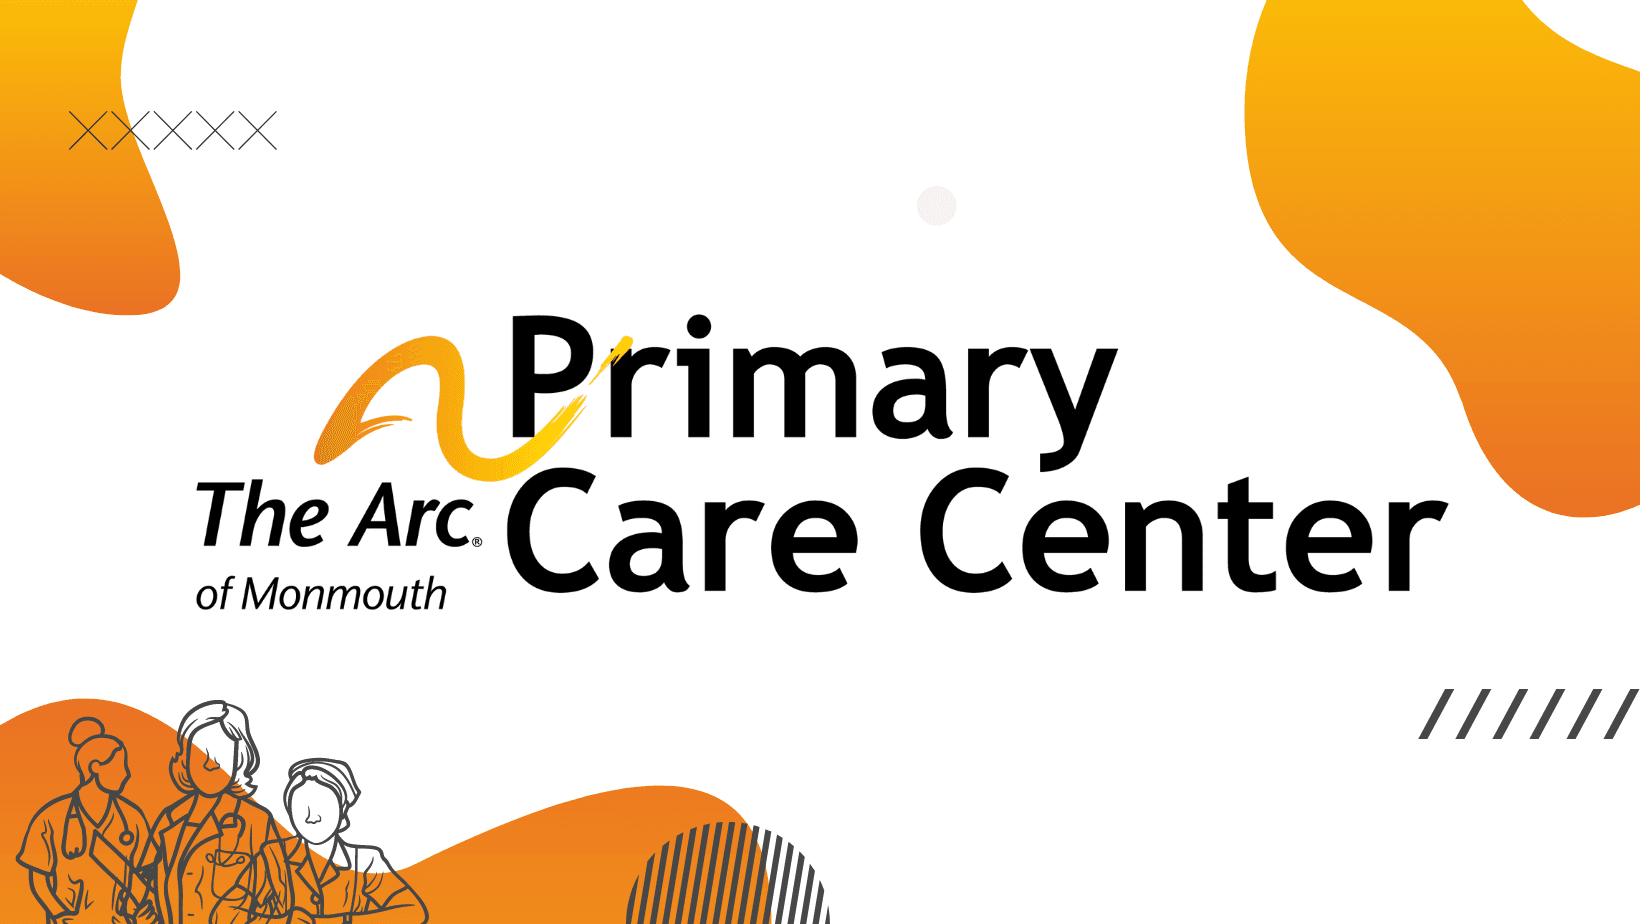 The Arc of Monmouth Primary Care Center